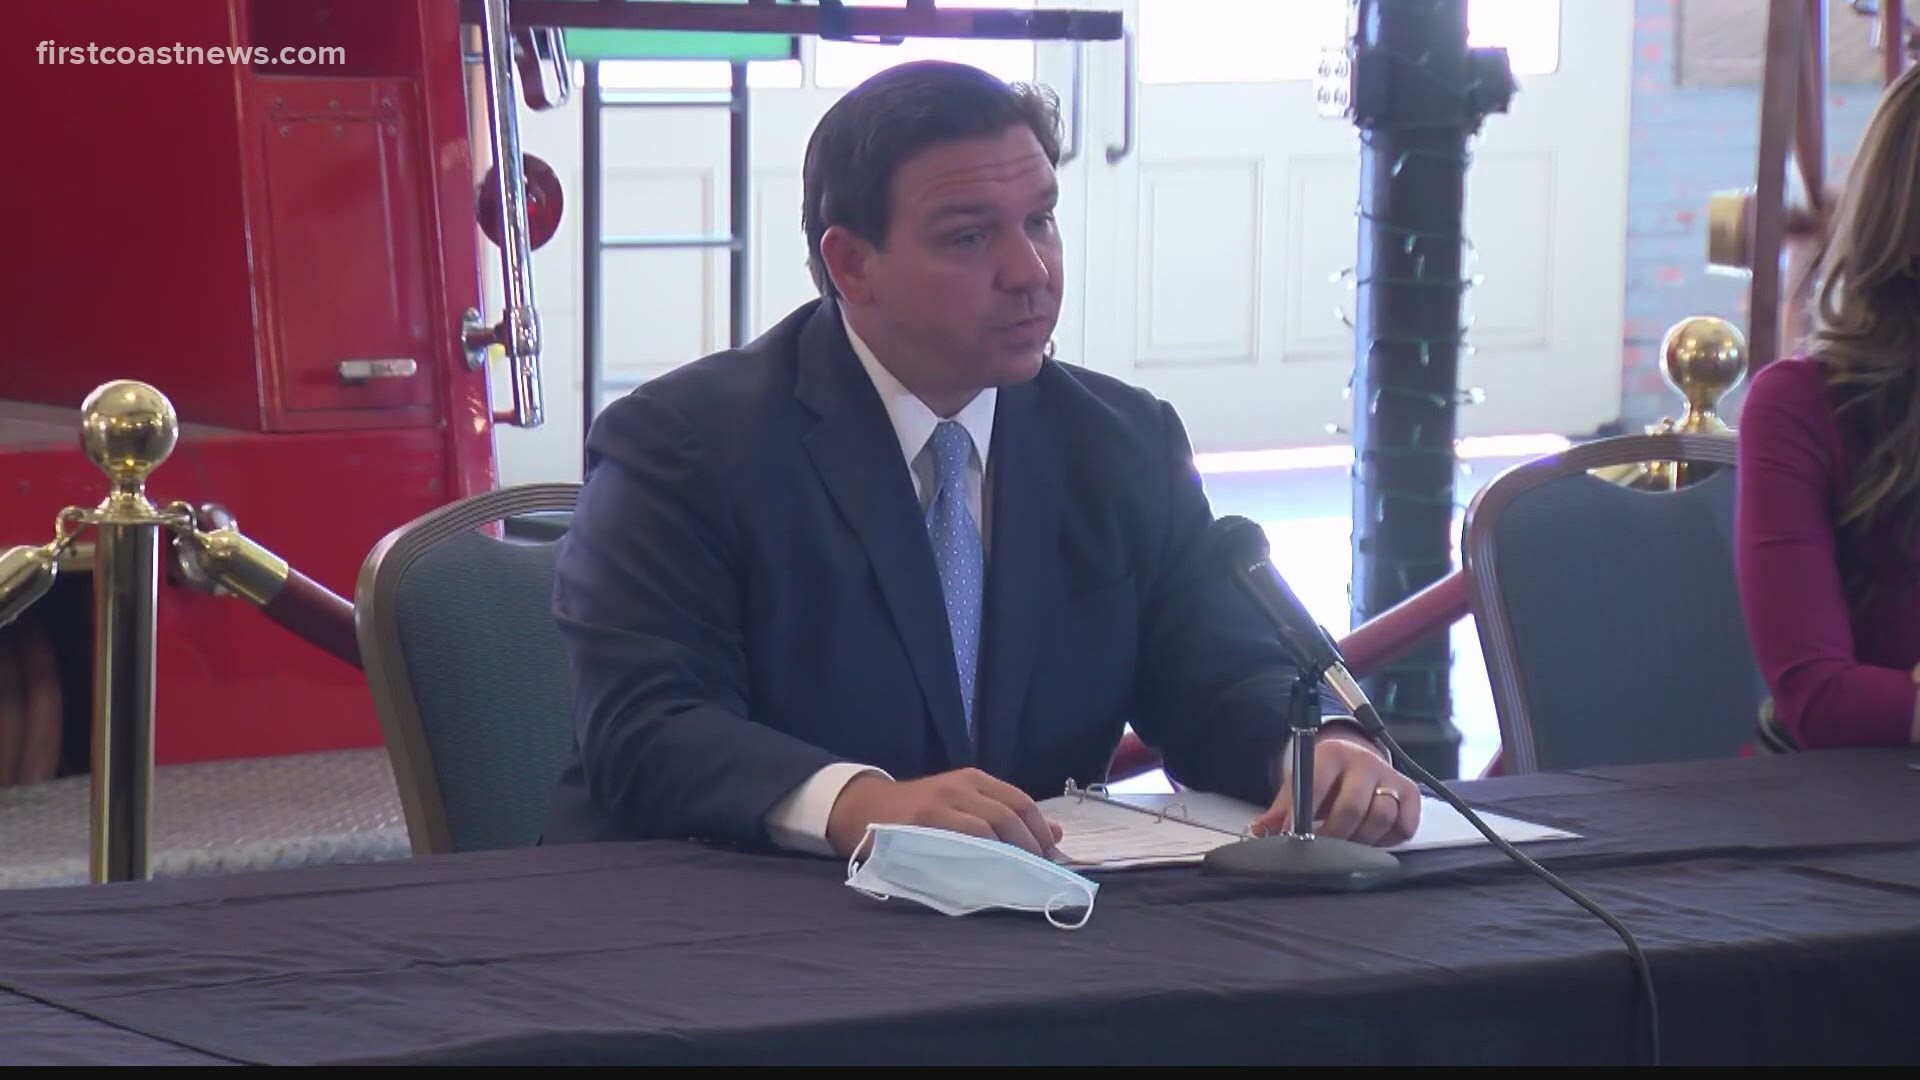 Gov. Desantis says that a portion of the money from the CARES Act will go to expanding statewide mental health services.